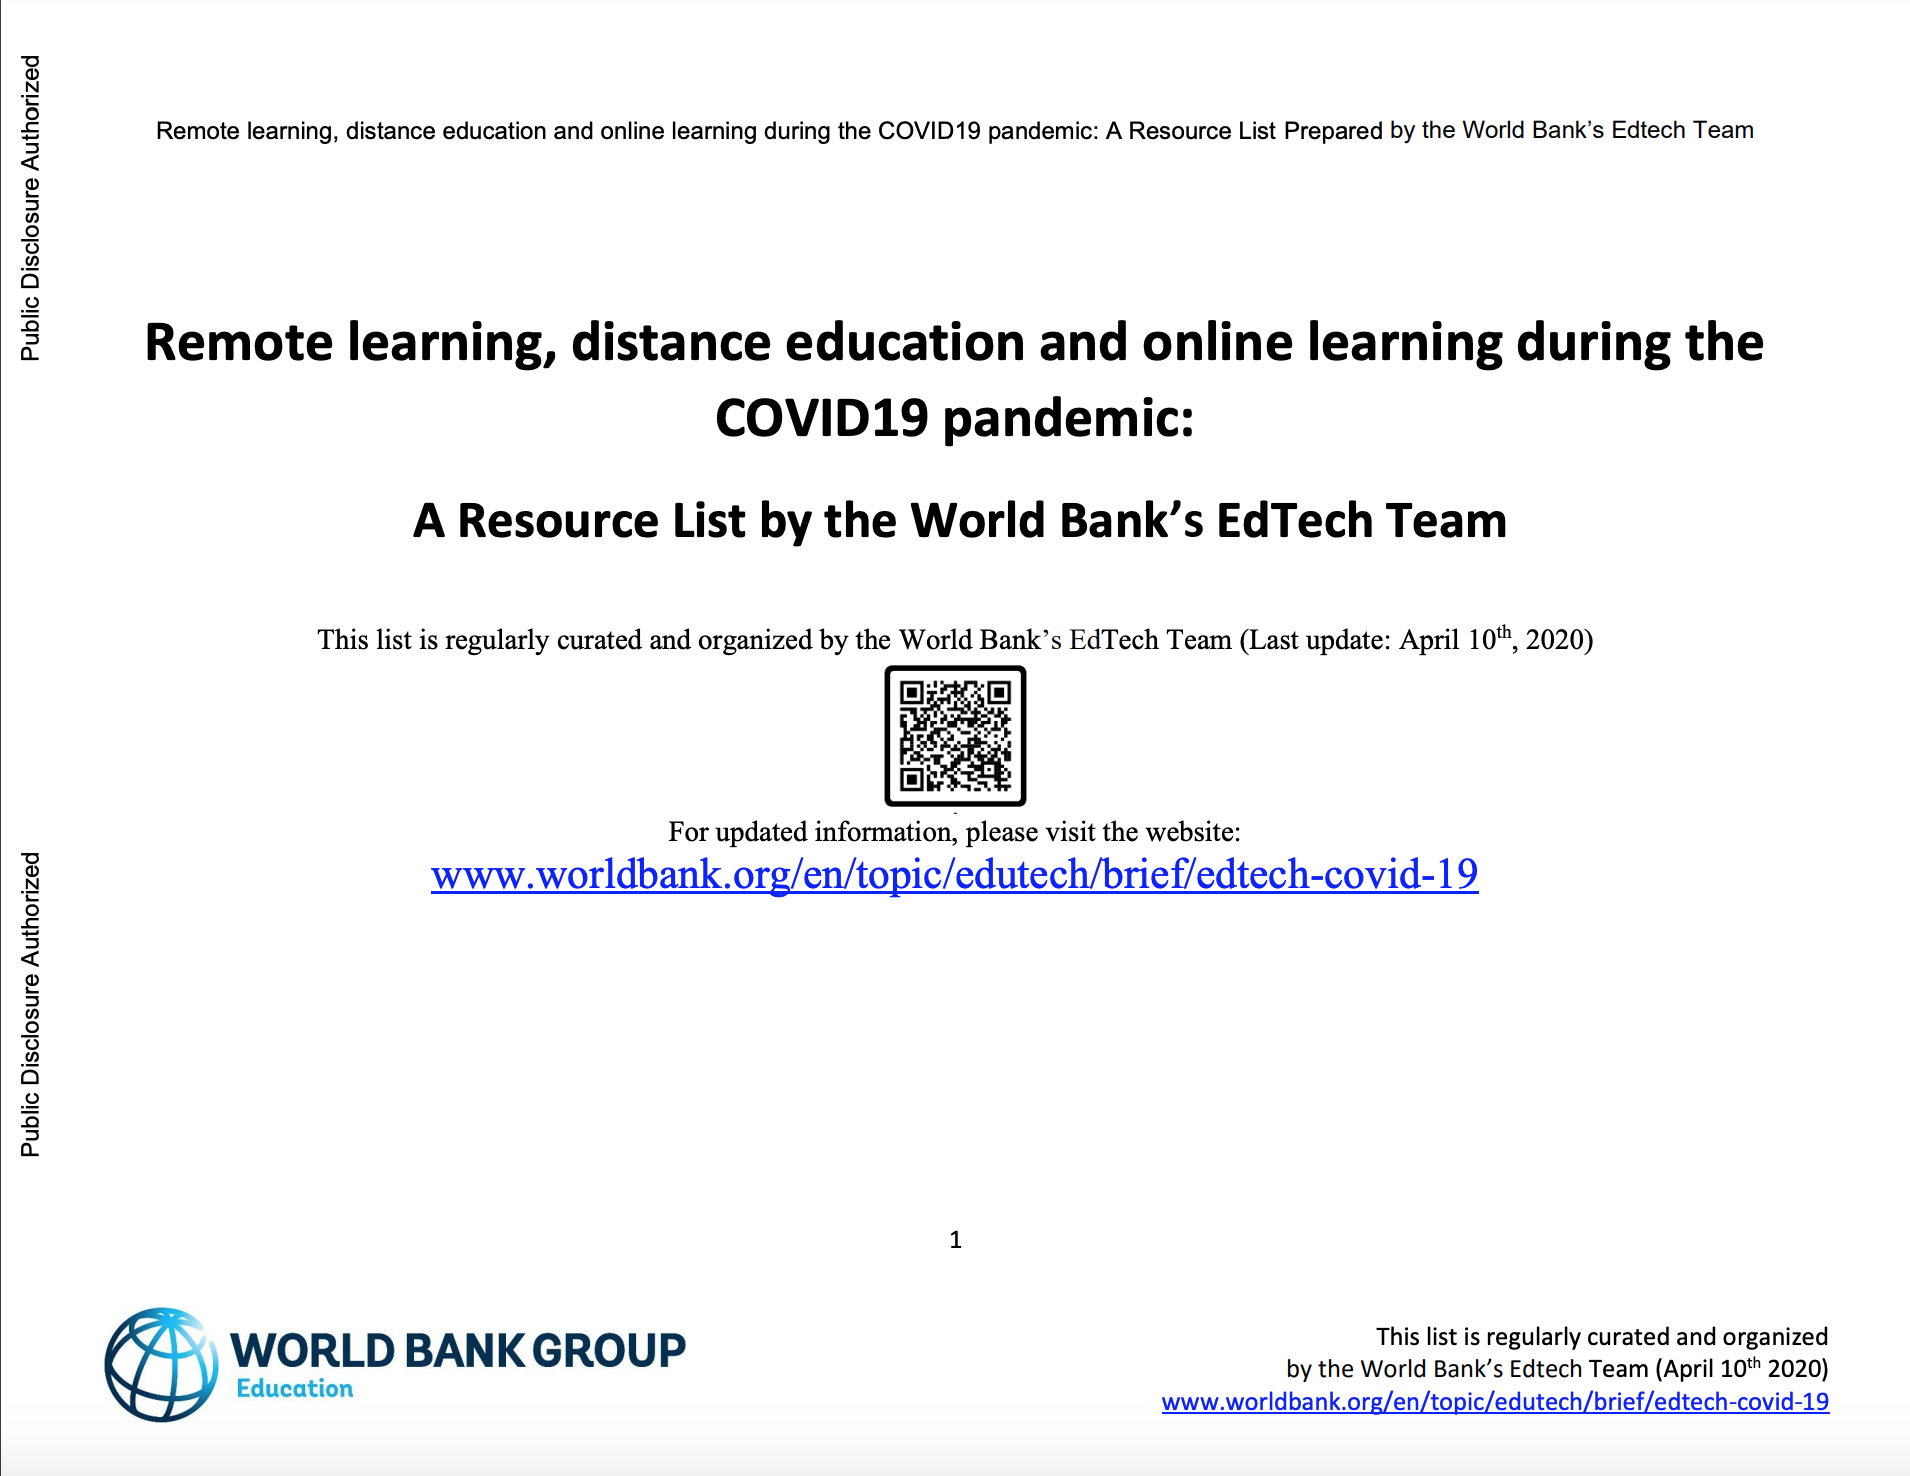 Remote Learning Distance Education And Online Learning During The